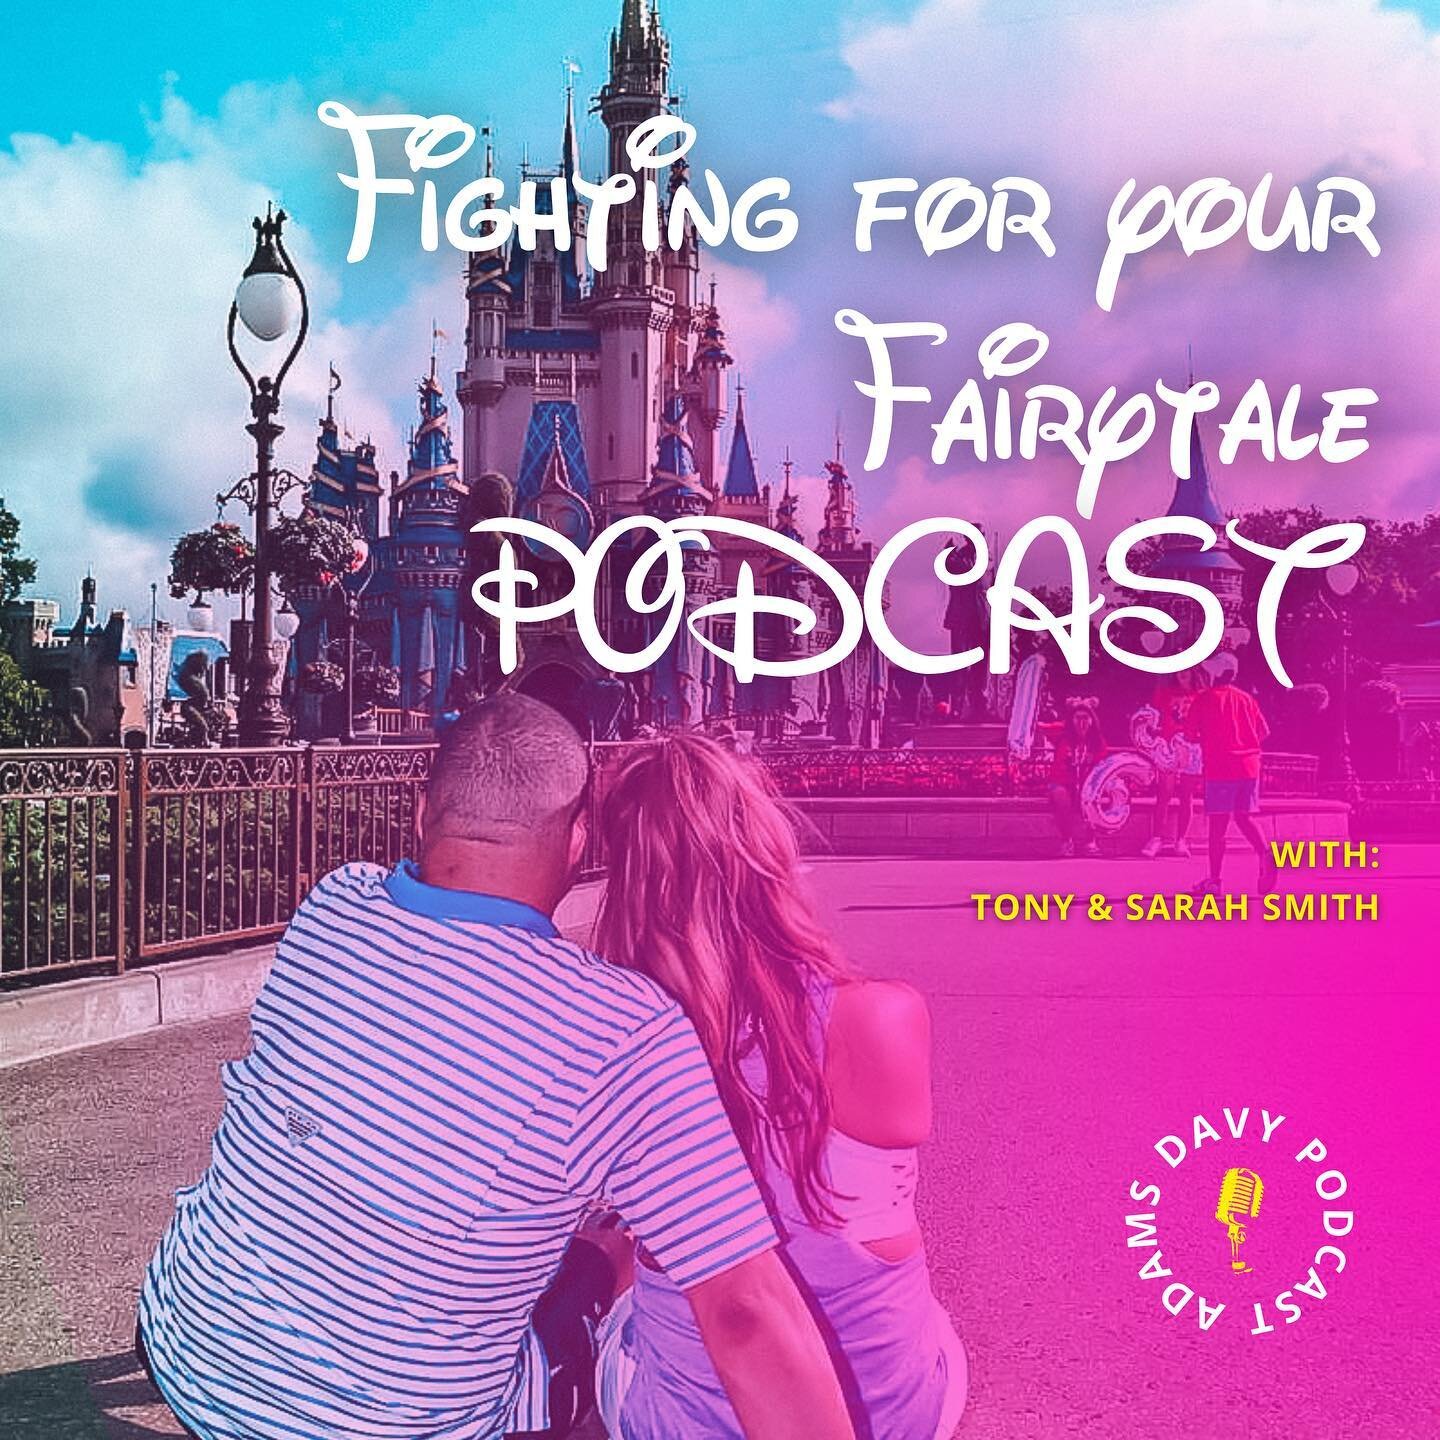 Did you know we started a podcast? With everything we have been through we thought we would share it with you! This week&rsquo;s episode is about how to figure out what goals you have! Take a listen&hellip; we would love your feedback!! 💖 check out 